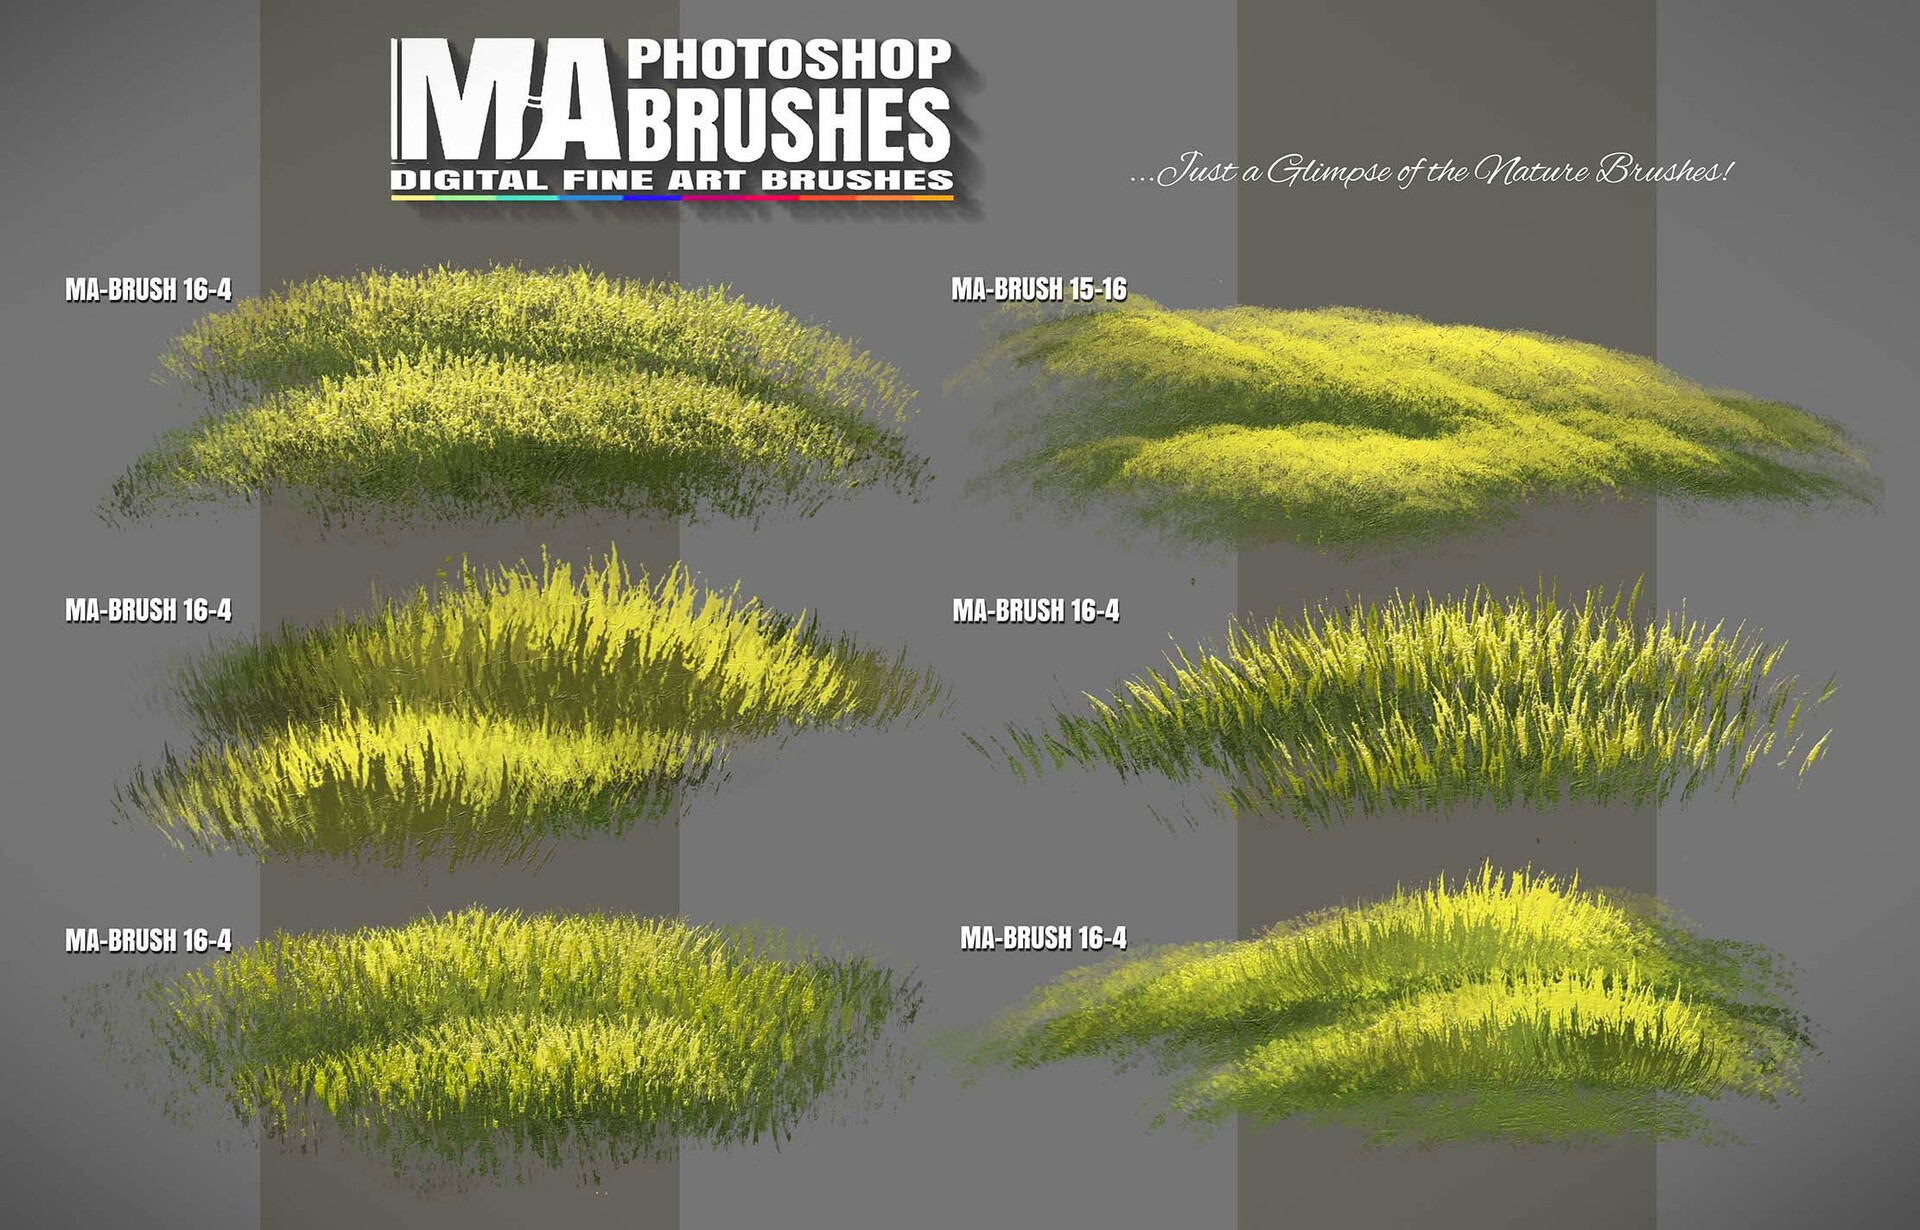 ArtStation - Photoshop MA-Brushes also for Nature (Grass, Foliage, Tree